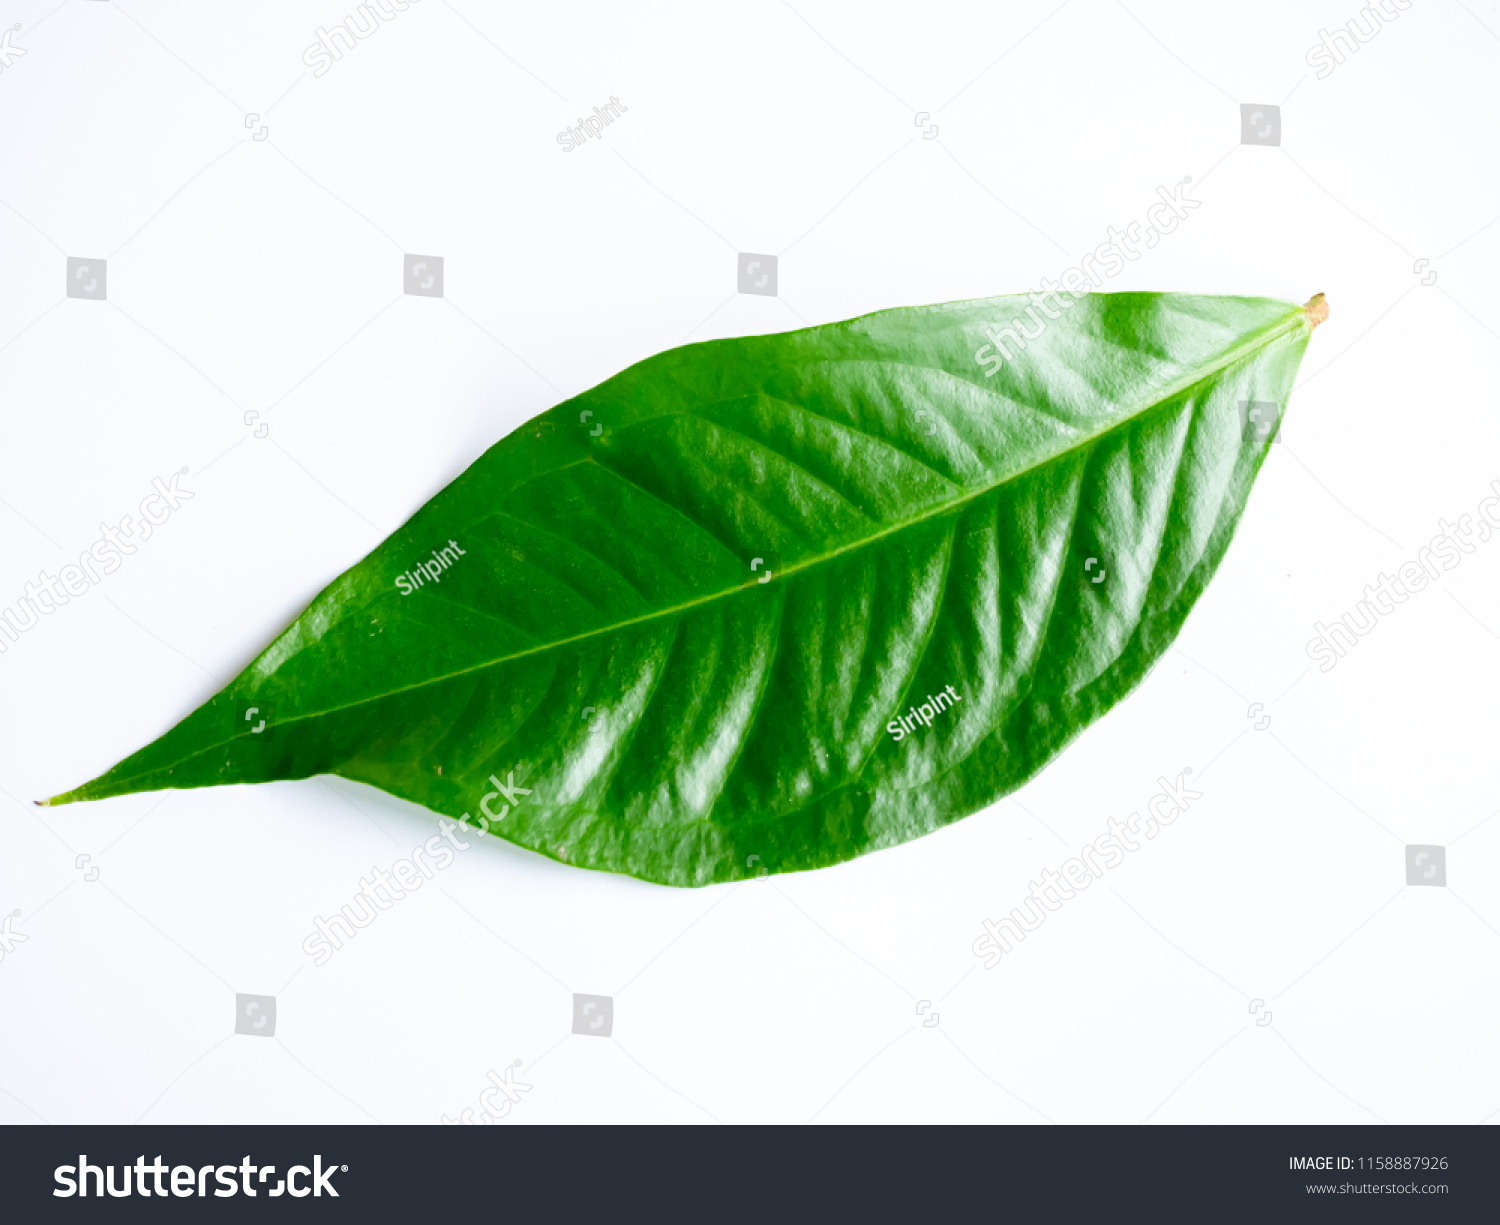 Green leaf on white background and clipping path #1158887926